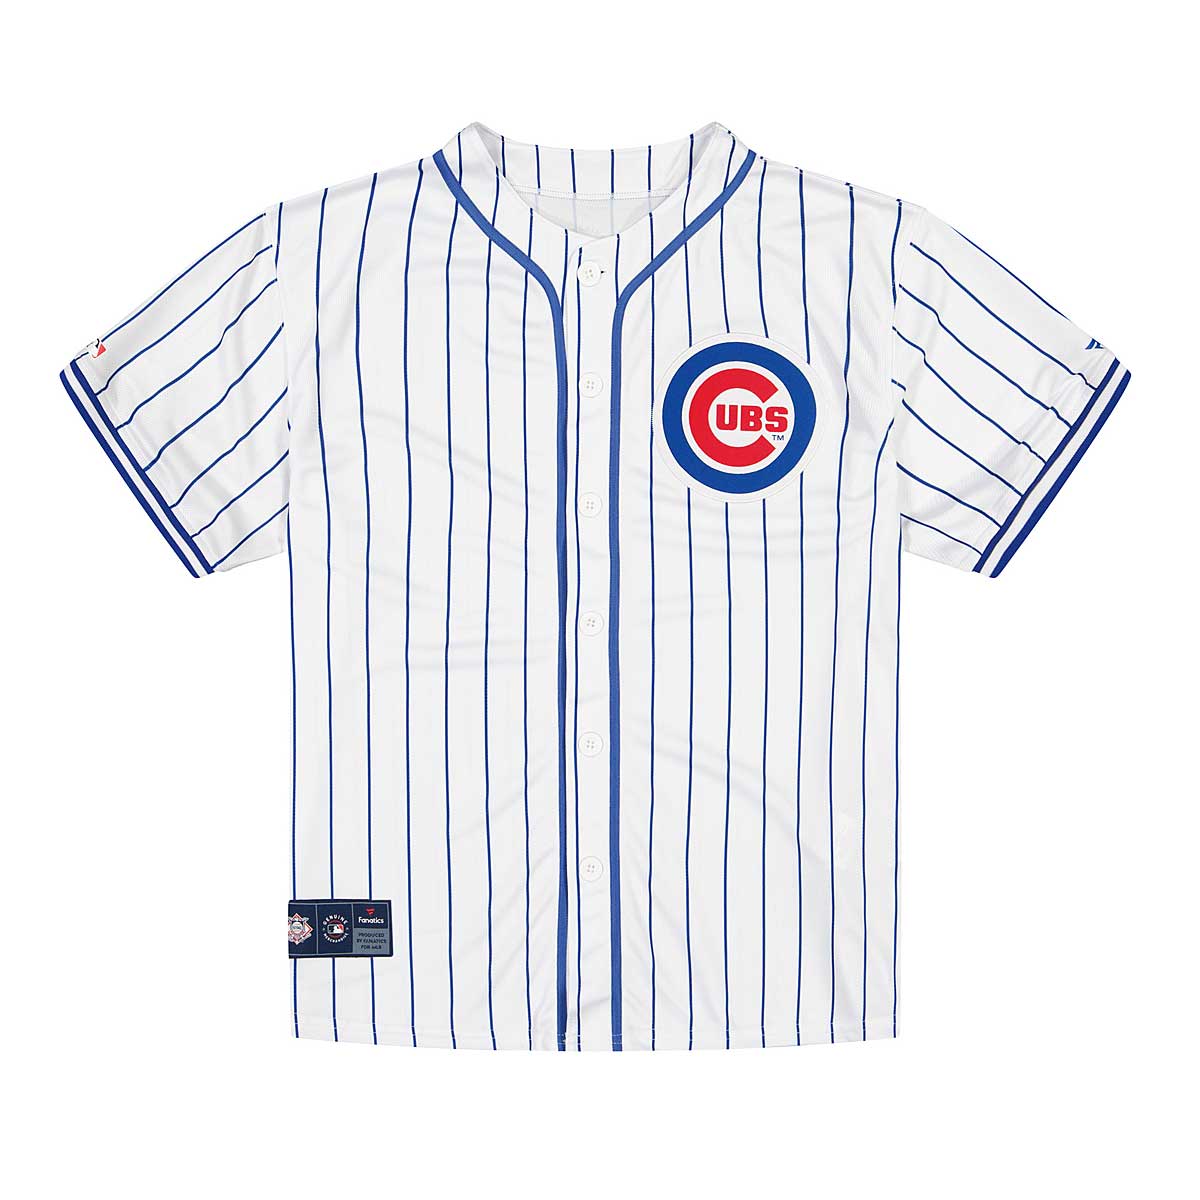 Fanatics Mlb Franchise Jersey Chicago Cubs, White Chicago Cubs